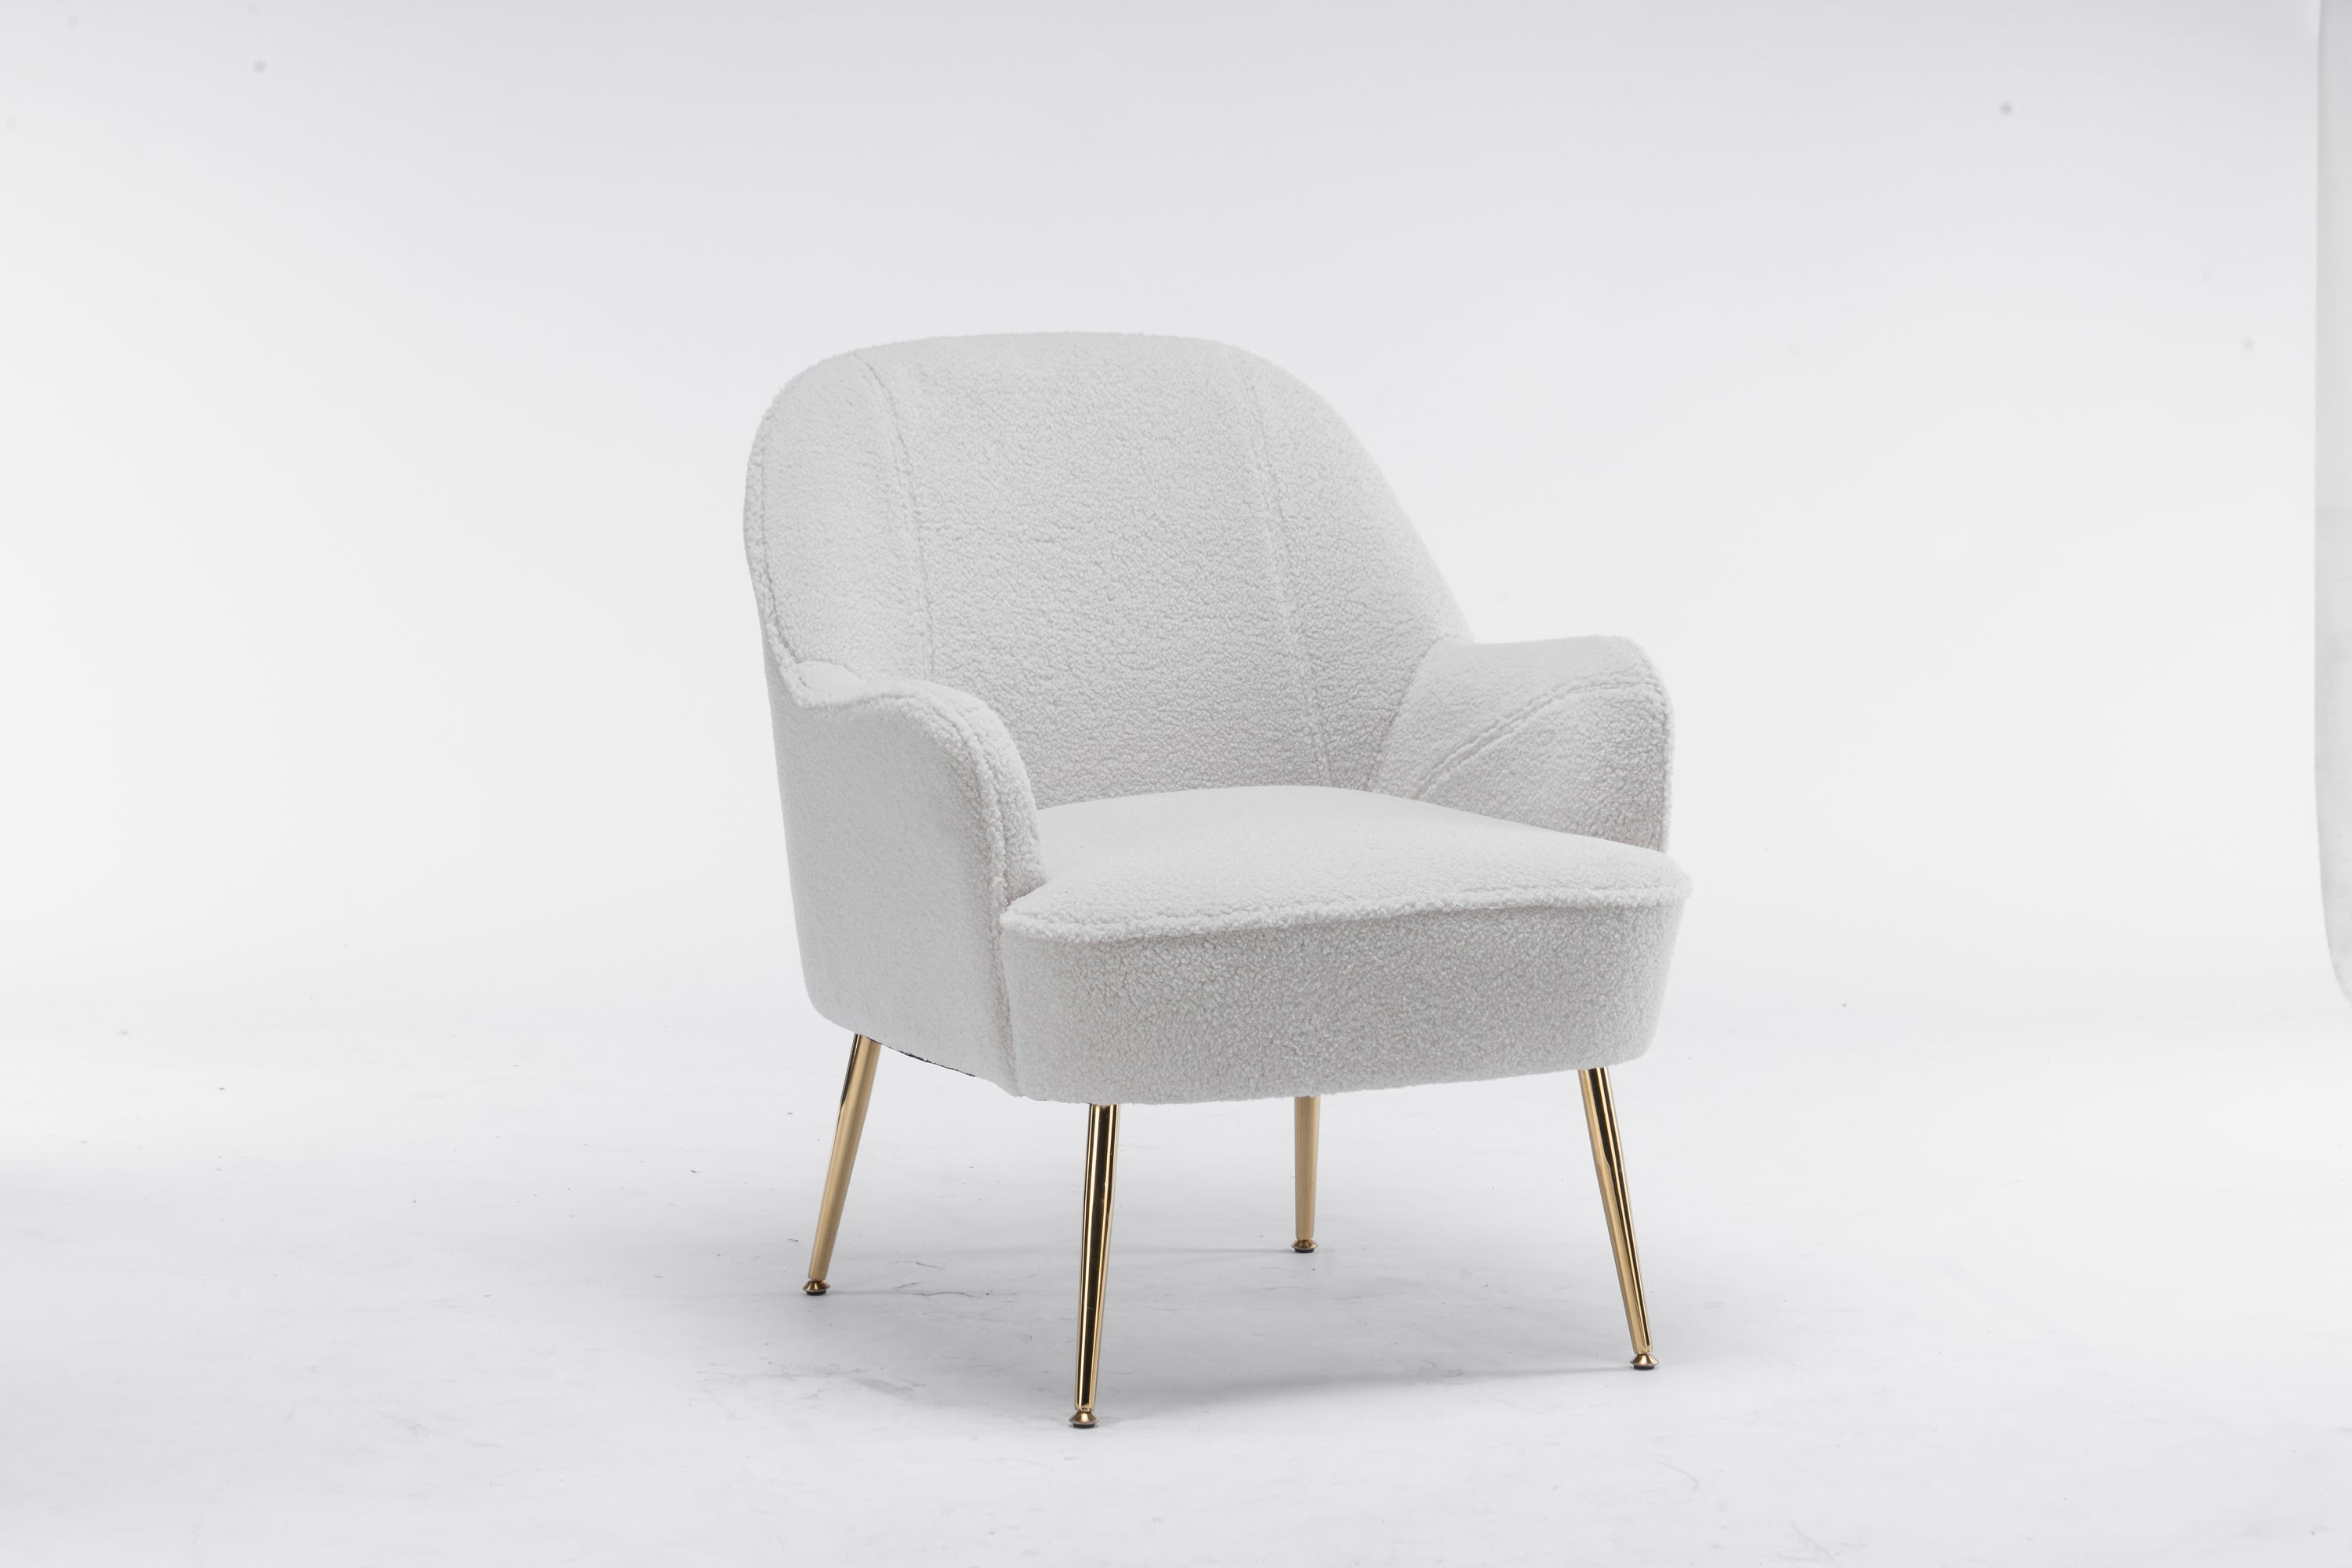 Modern Soft White Teddy Fabric Ergonomics Accent Chair With Gold Legs And Adjustable Legs